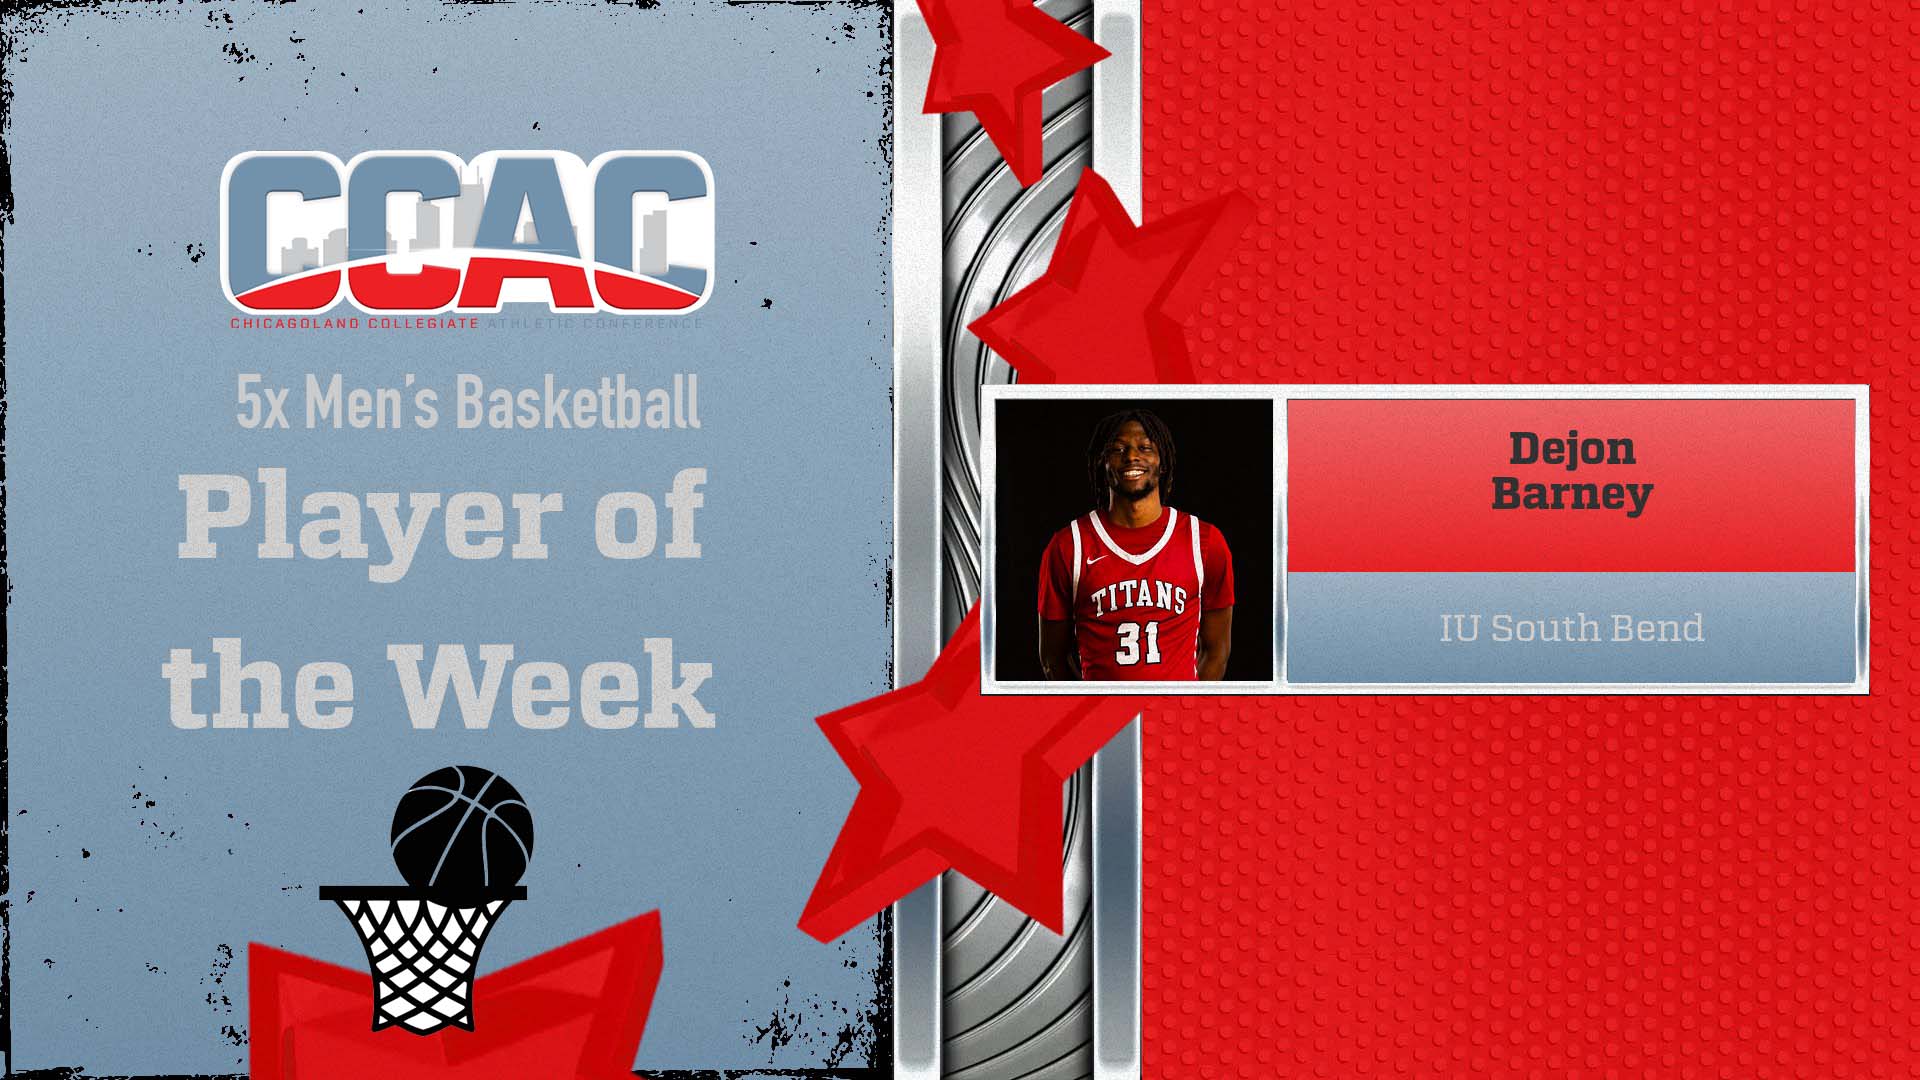 IUSB's Barney Hits The High-Five Mark On Men's Basketball Player of the Week Honors